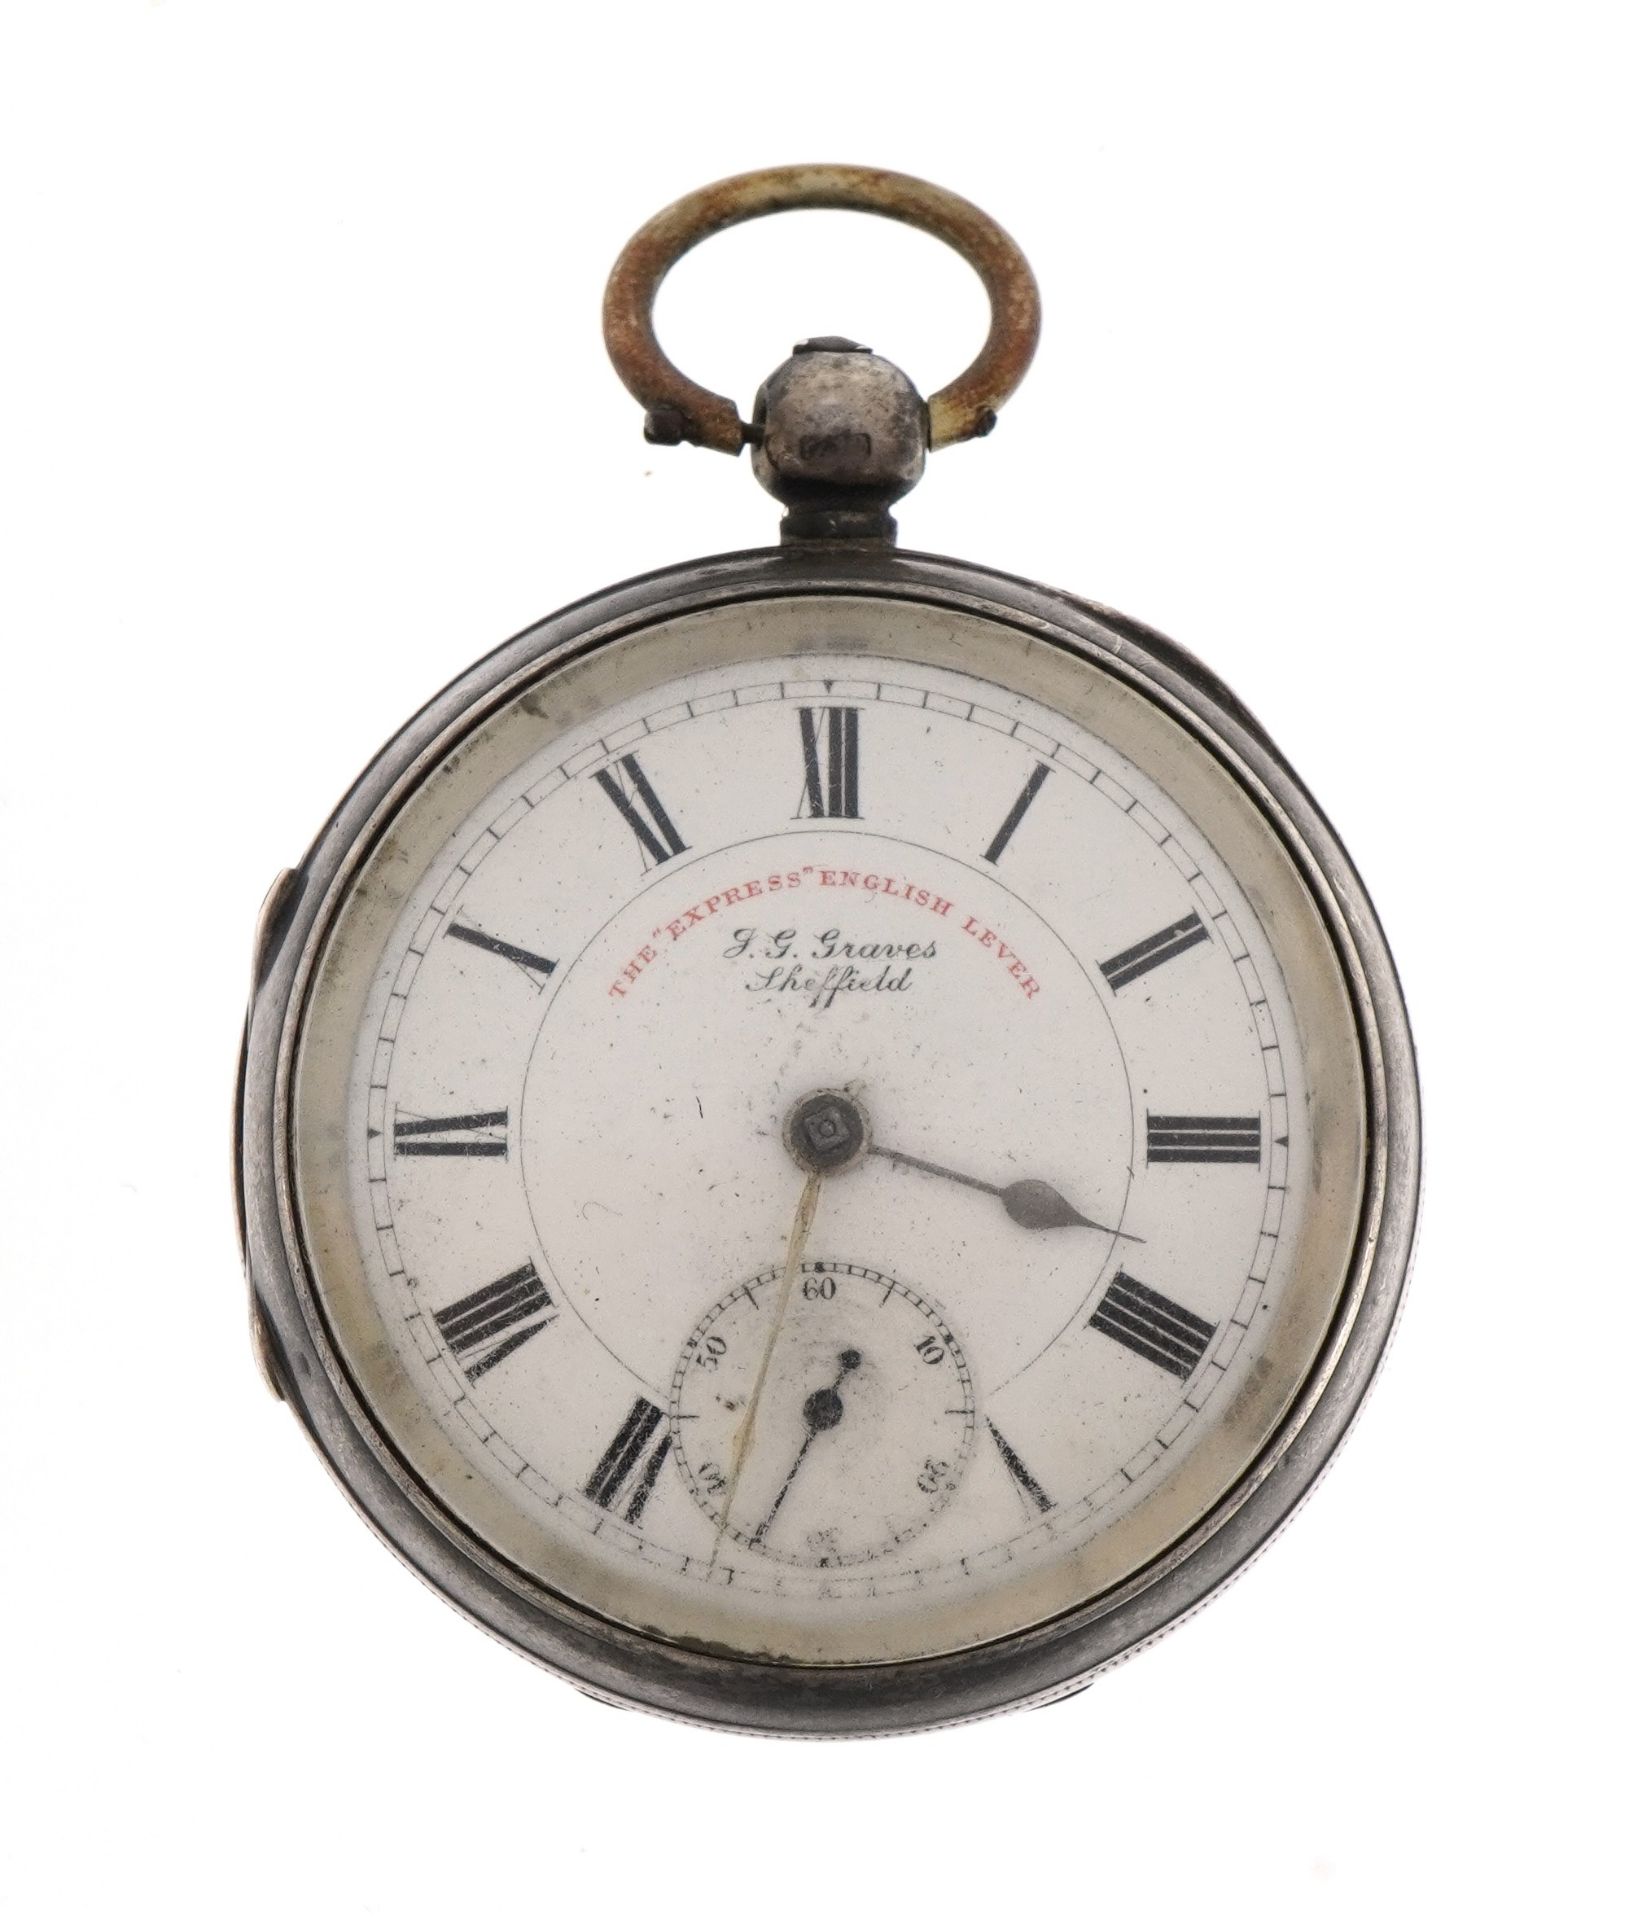 J G Graves, The Express English Lever gentlemen's silver open face pocket watch, the movement